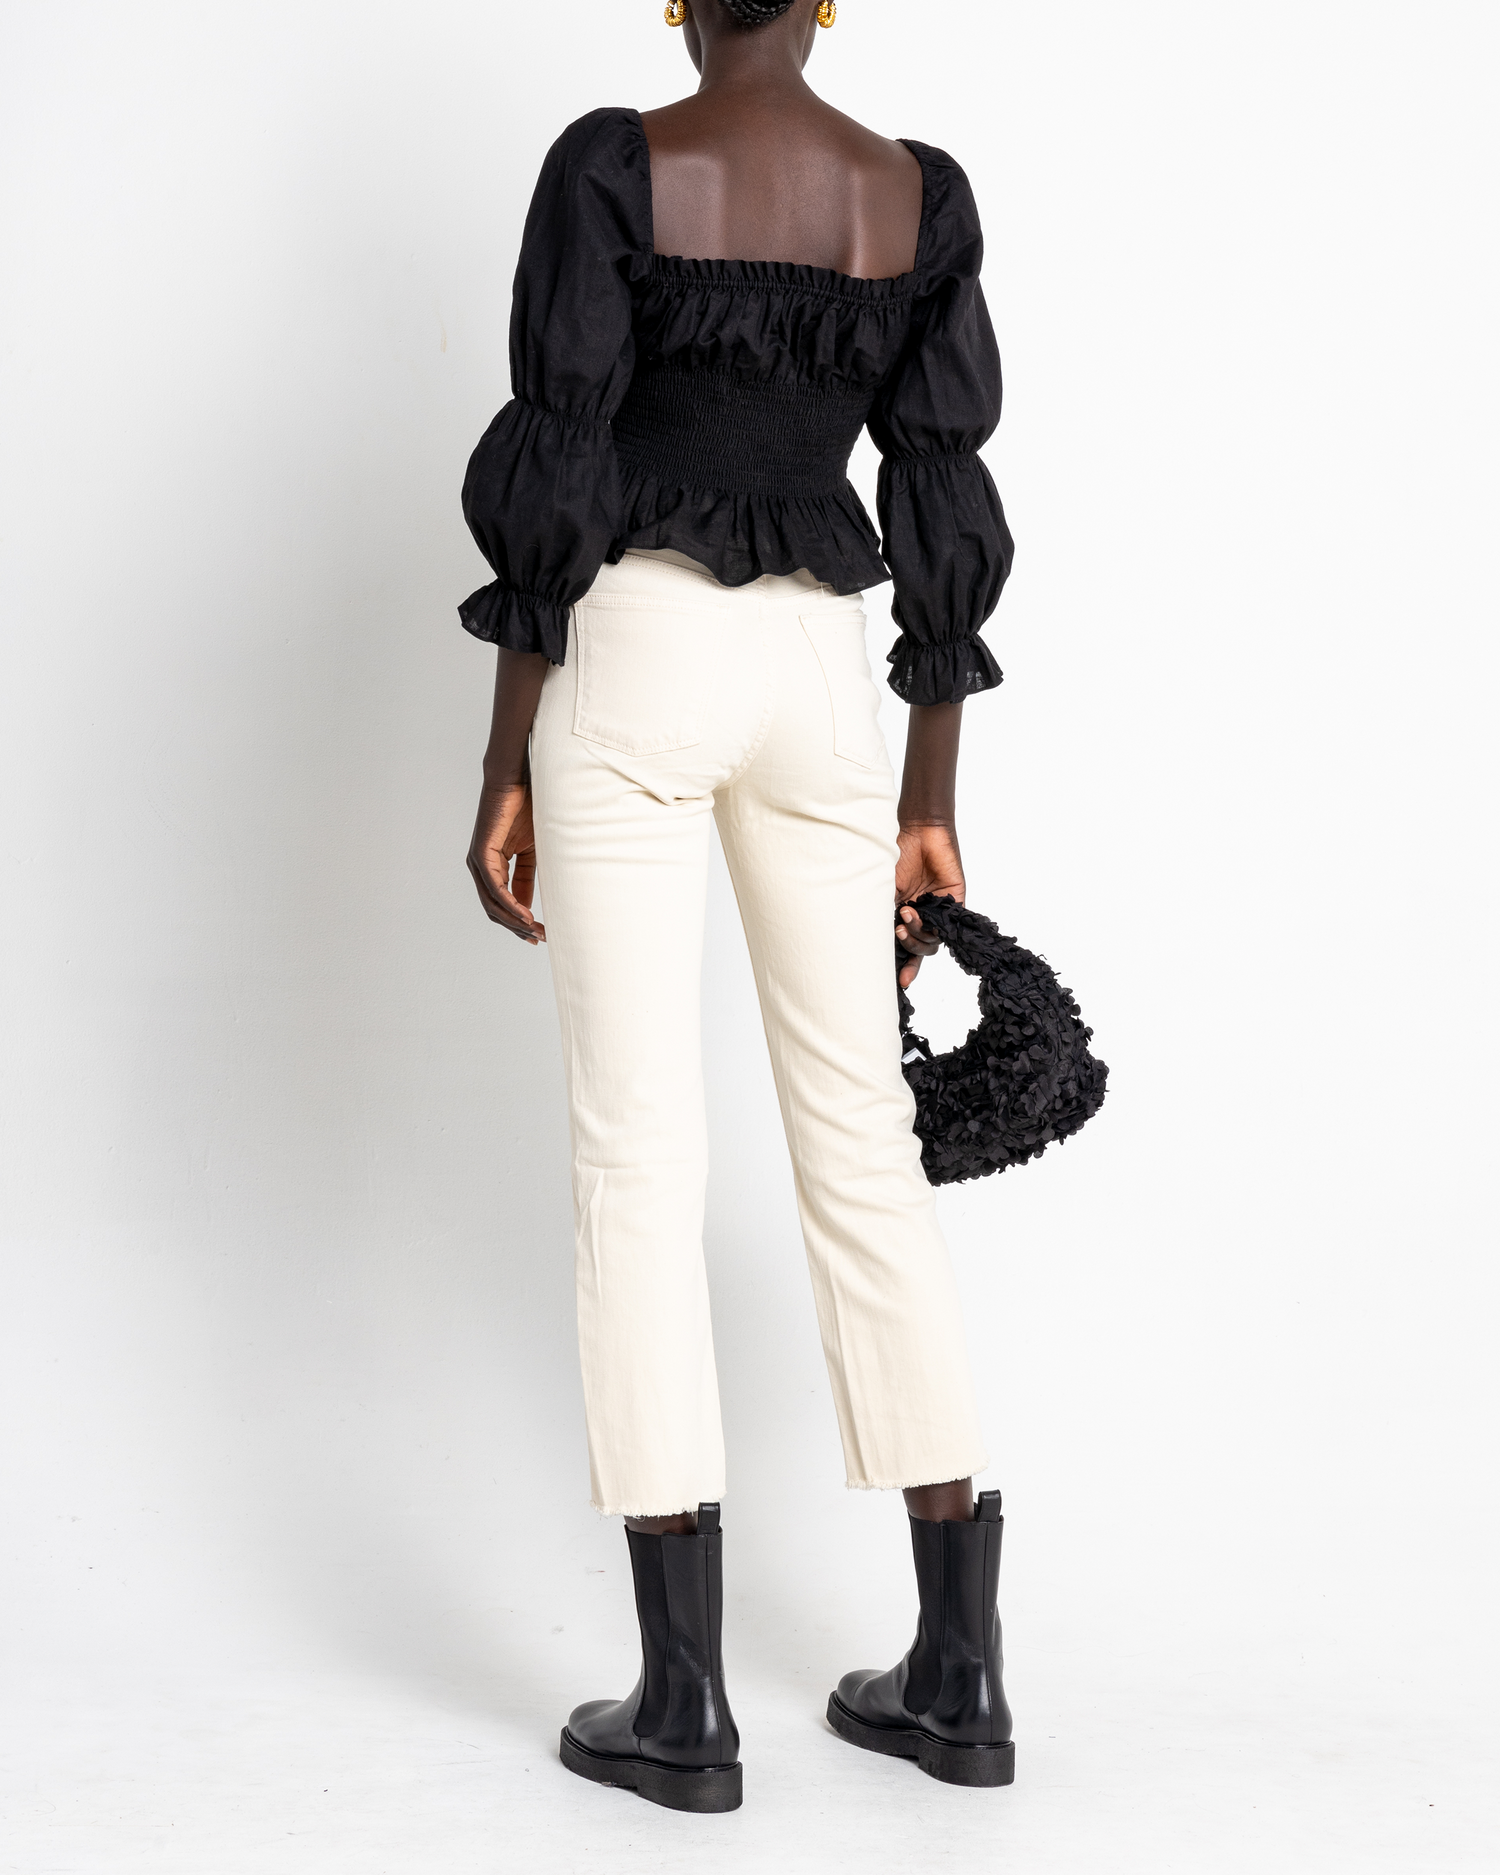 Sixth image of Gia Top, a black puff sleeve top, puff sleeves, square neckline